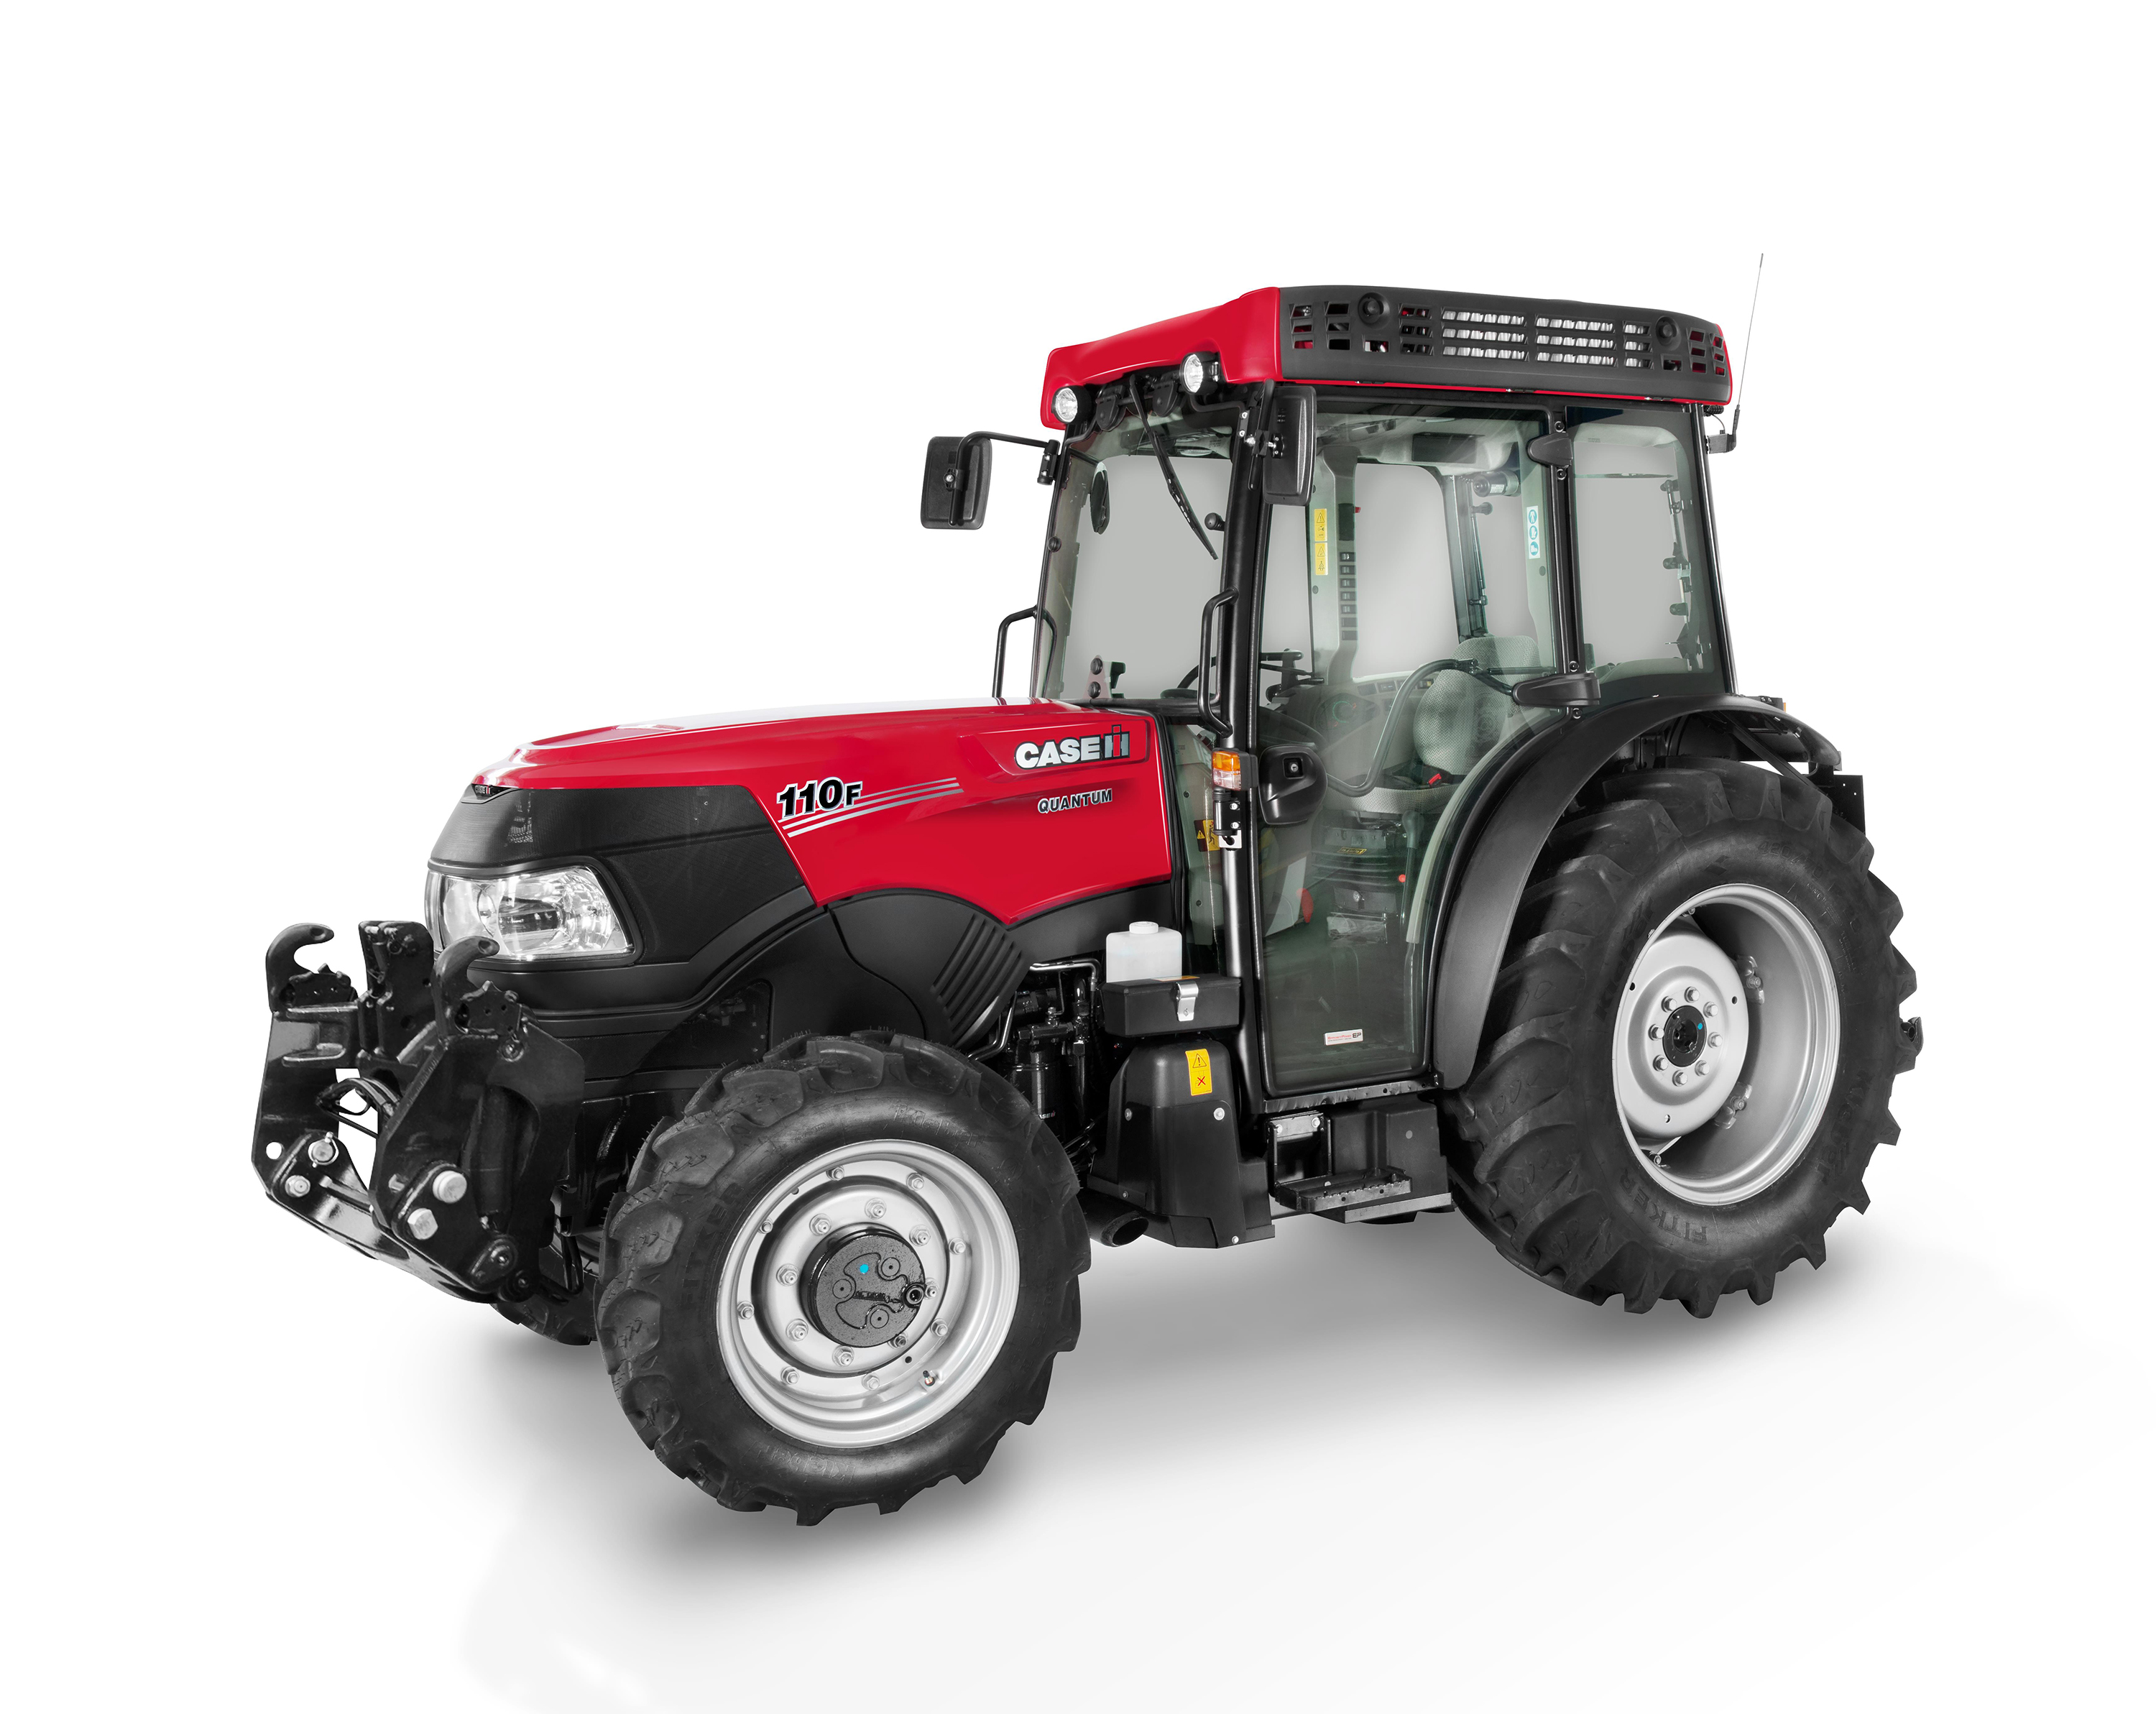 NEW QUANTUM TRACTORS BRING BETTER PERFORMANCE TO ORCHARD, VINEYARD AND VEGETABLE SECTORS